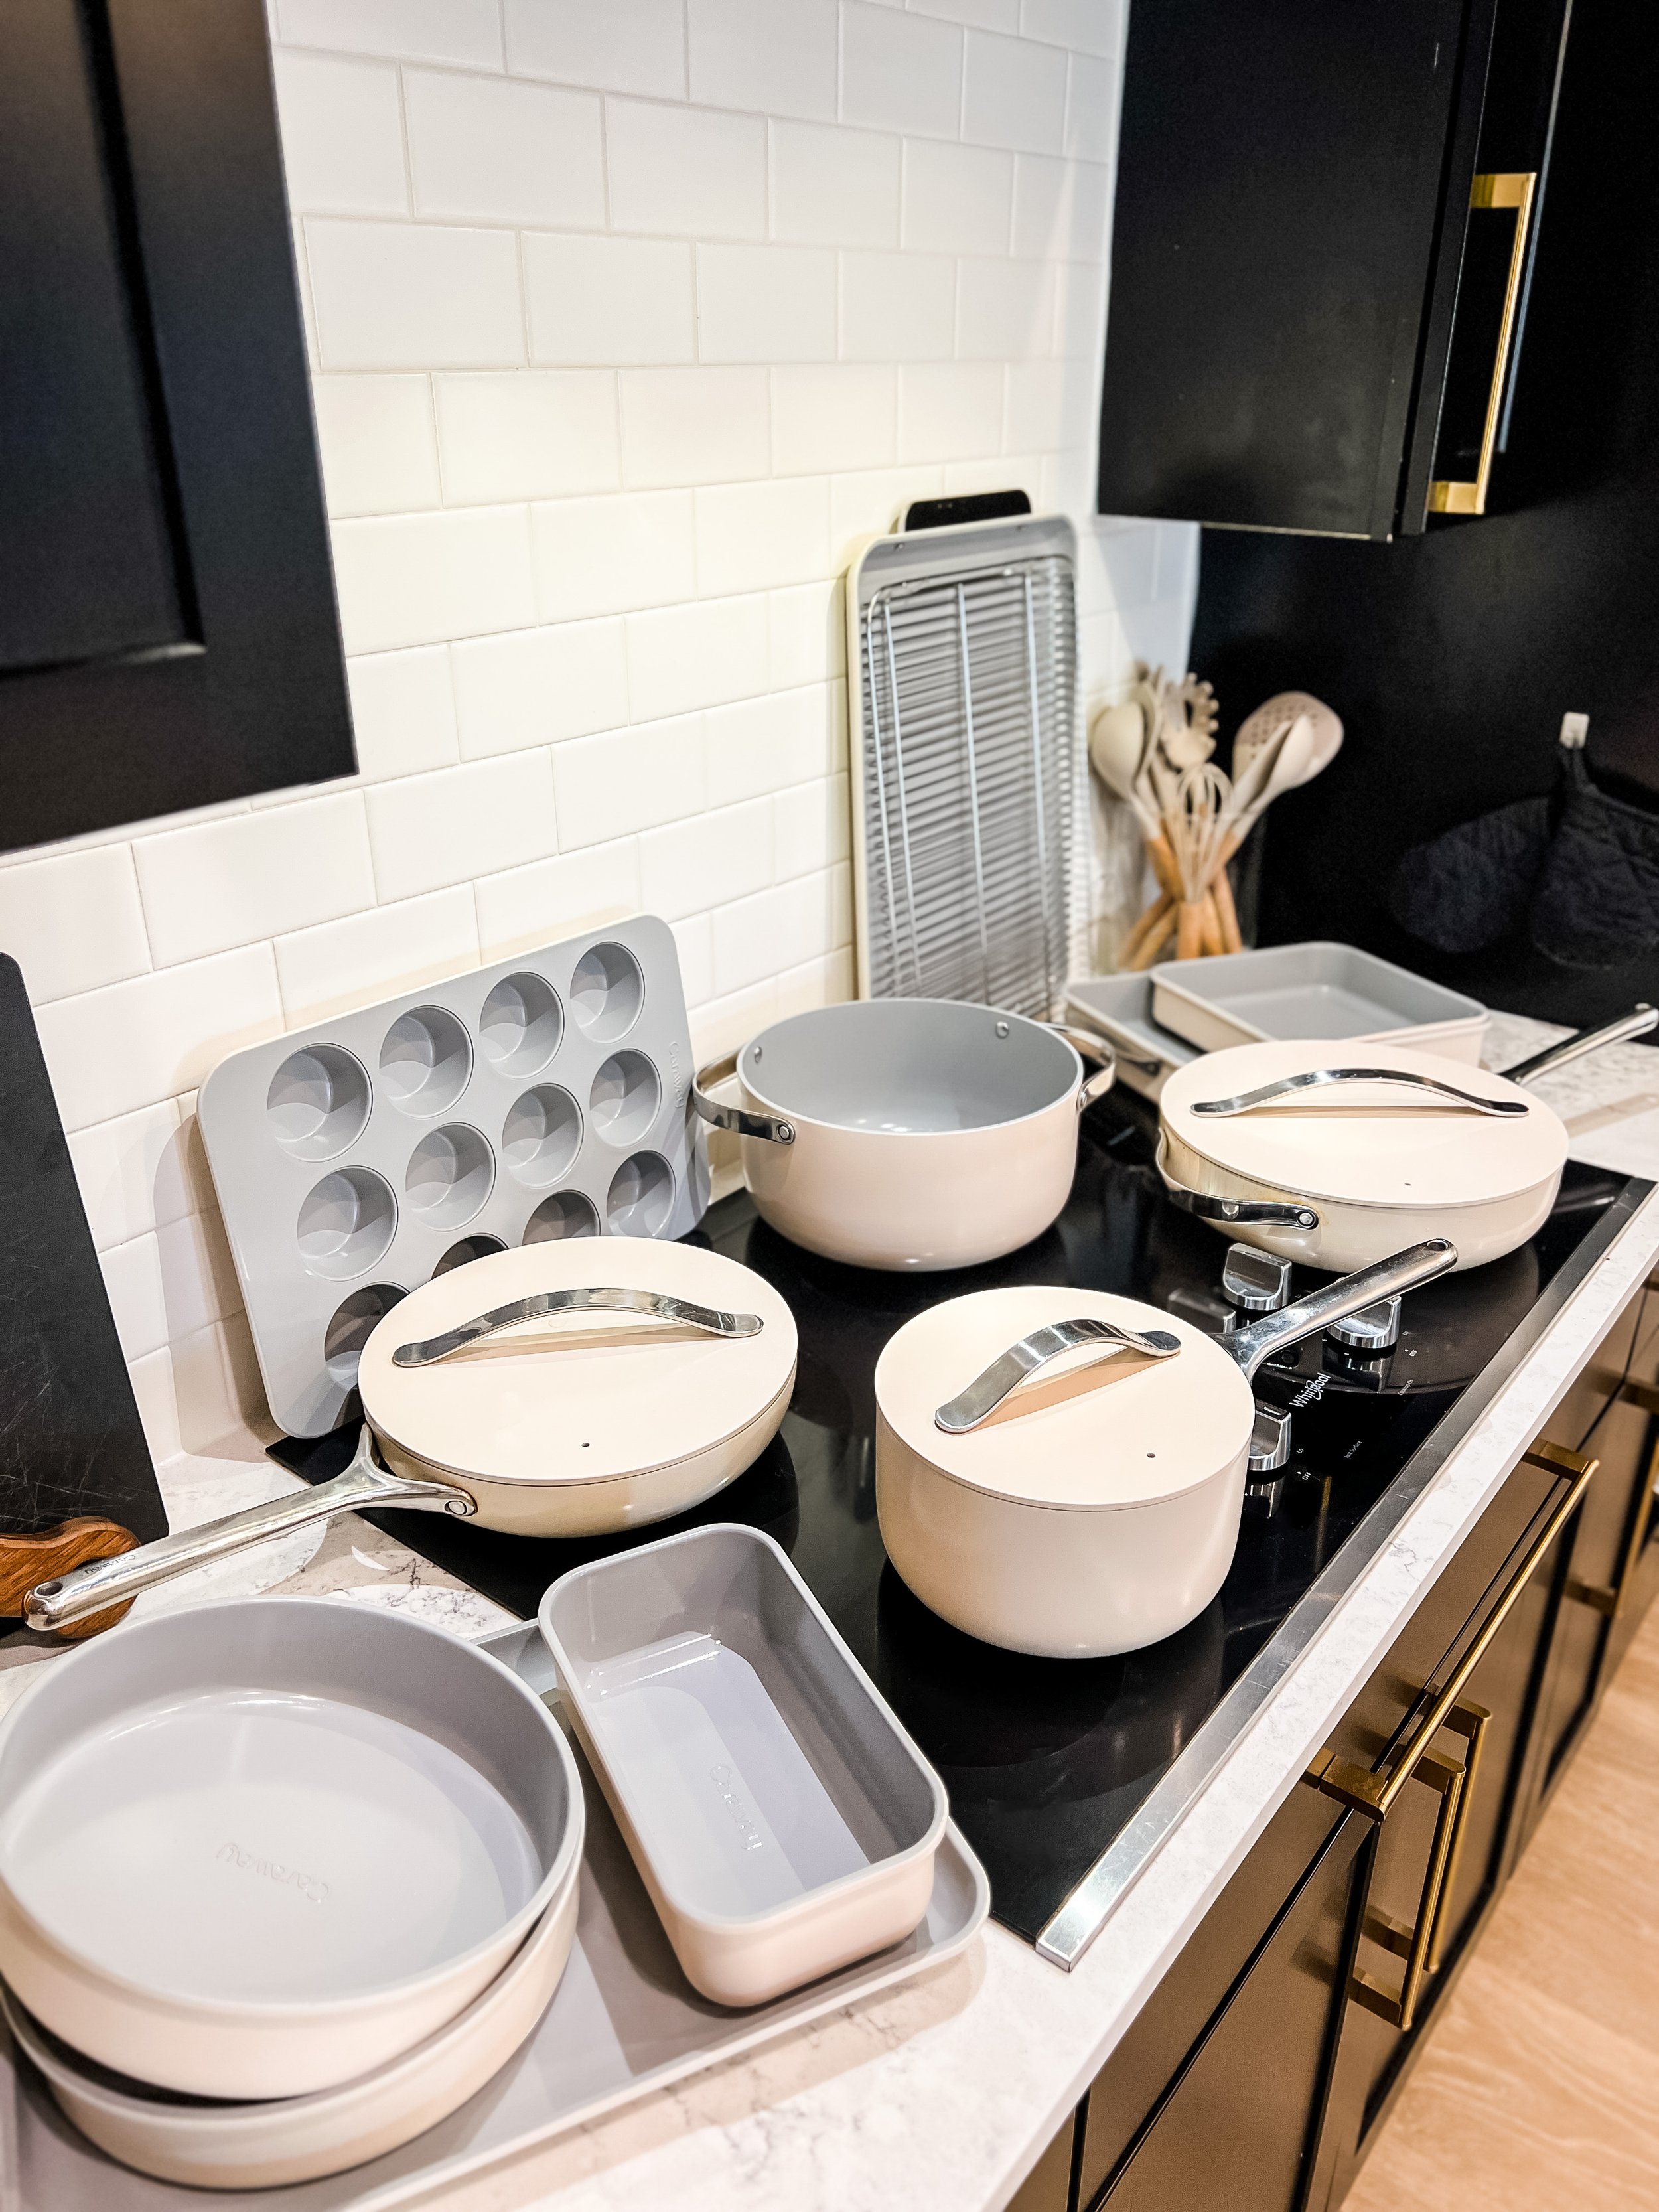 Introducing the Next Phase of Caraway Home: Bakeware